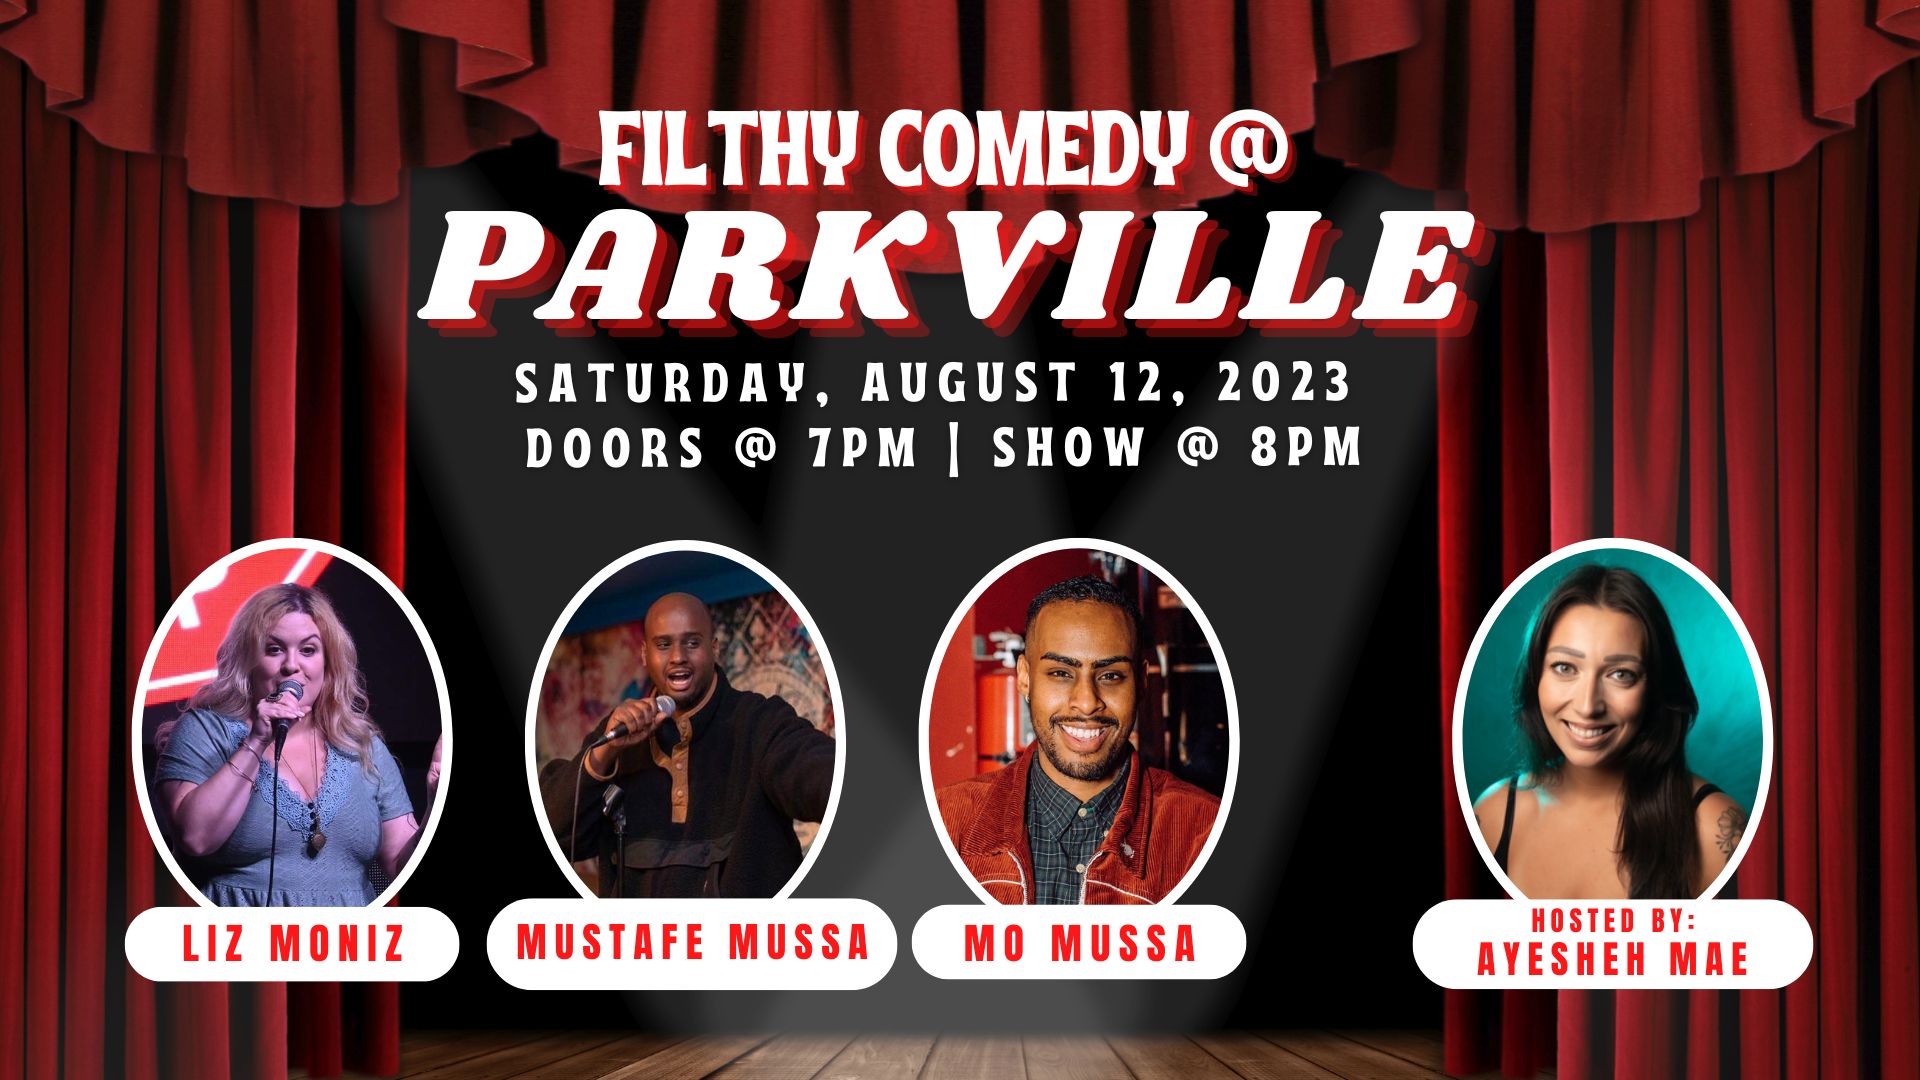 Filthy Comedy at Parkville Market. Featured comics are Mo Mussa, Mustafe Mussa, and Liz Moniz. Hosted by Ayesheh Mae